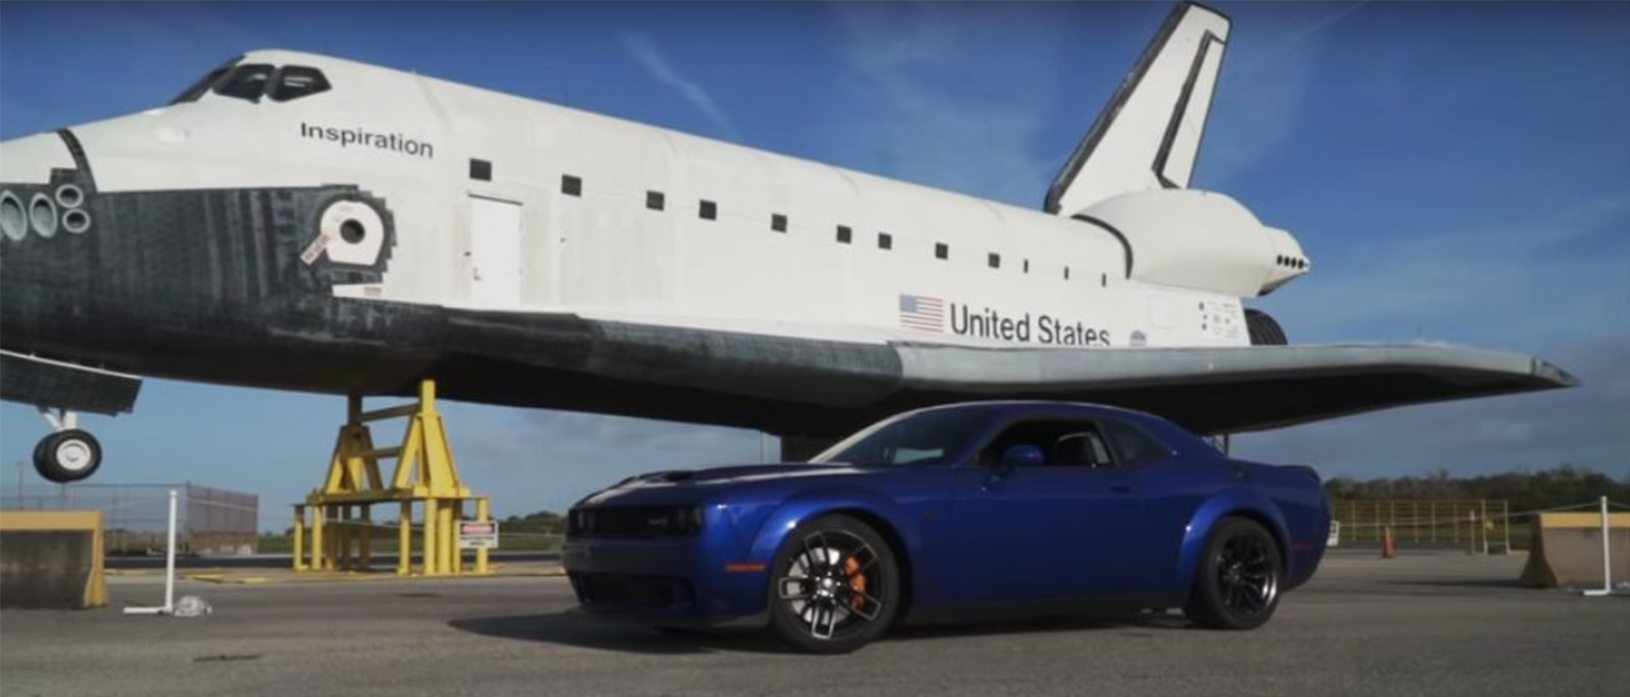 Dodge vehicle parked next to an airplane